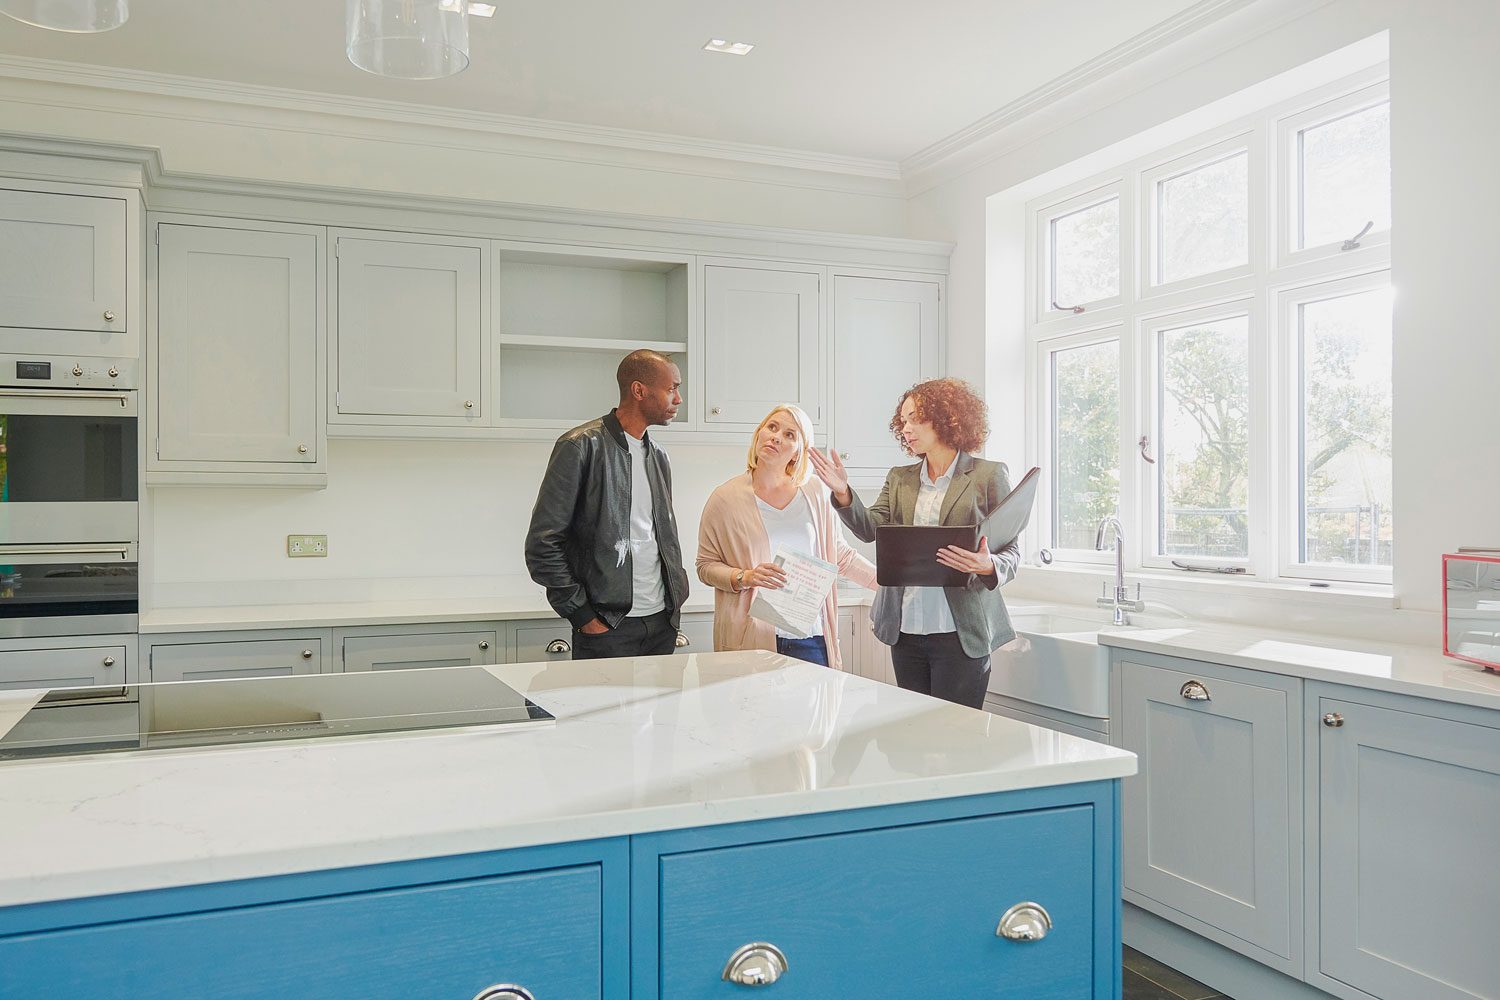 a saleswoman or estate agent shows a couple around a home with new kitchen